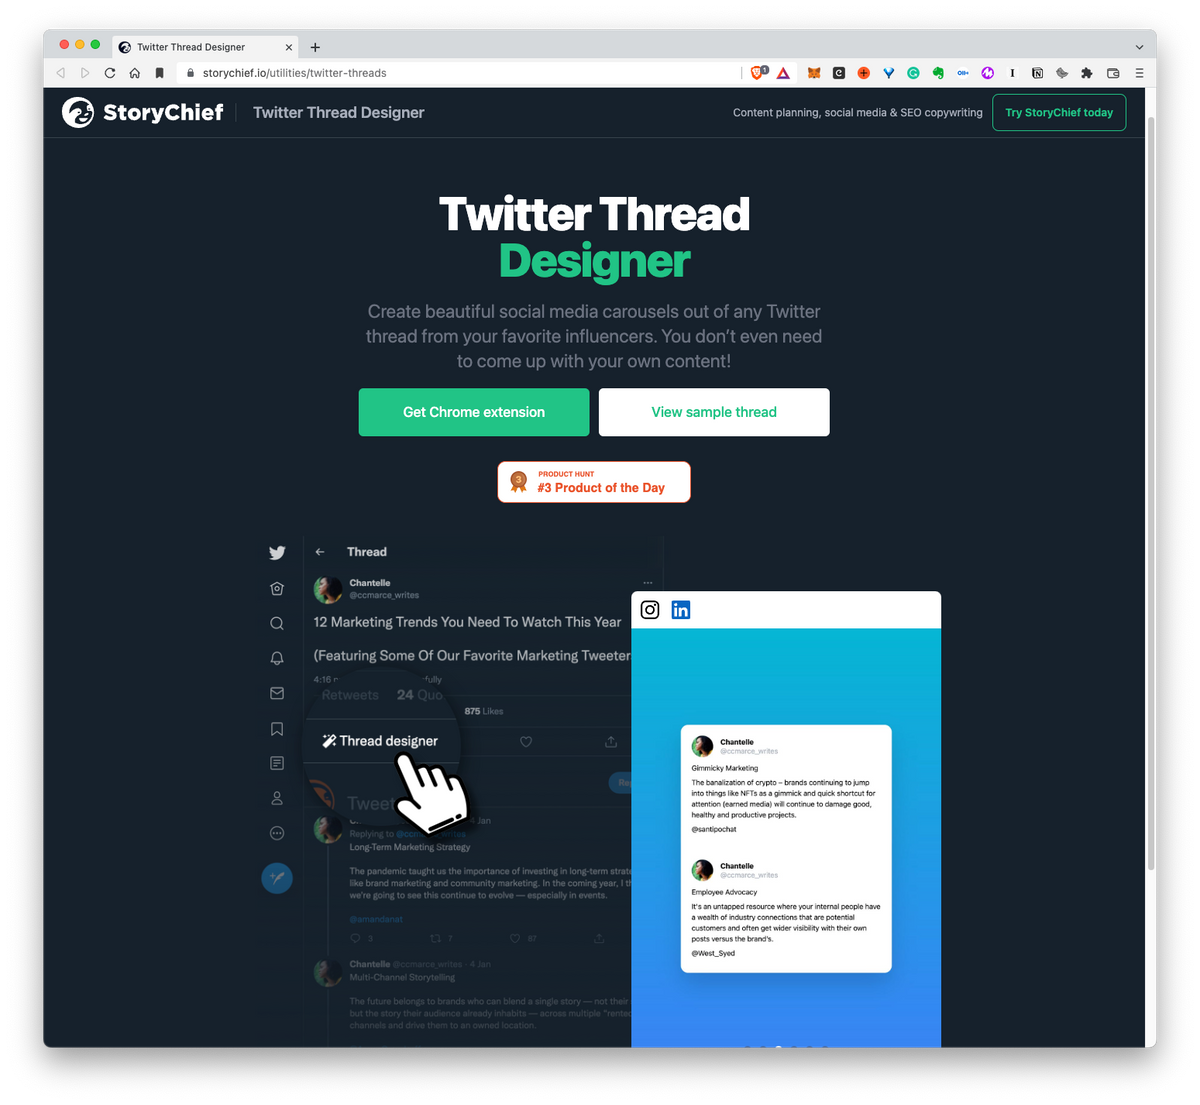 Twitter Thread Designer: Create beautiful social media carousels out of any Twitter thread from your favorite influencers.